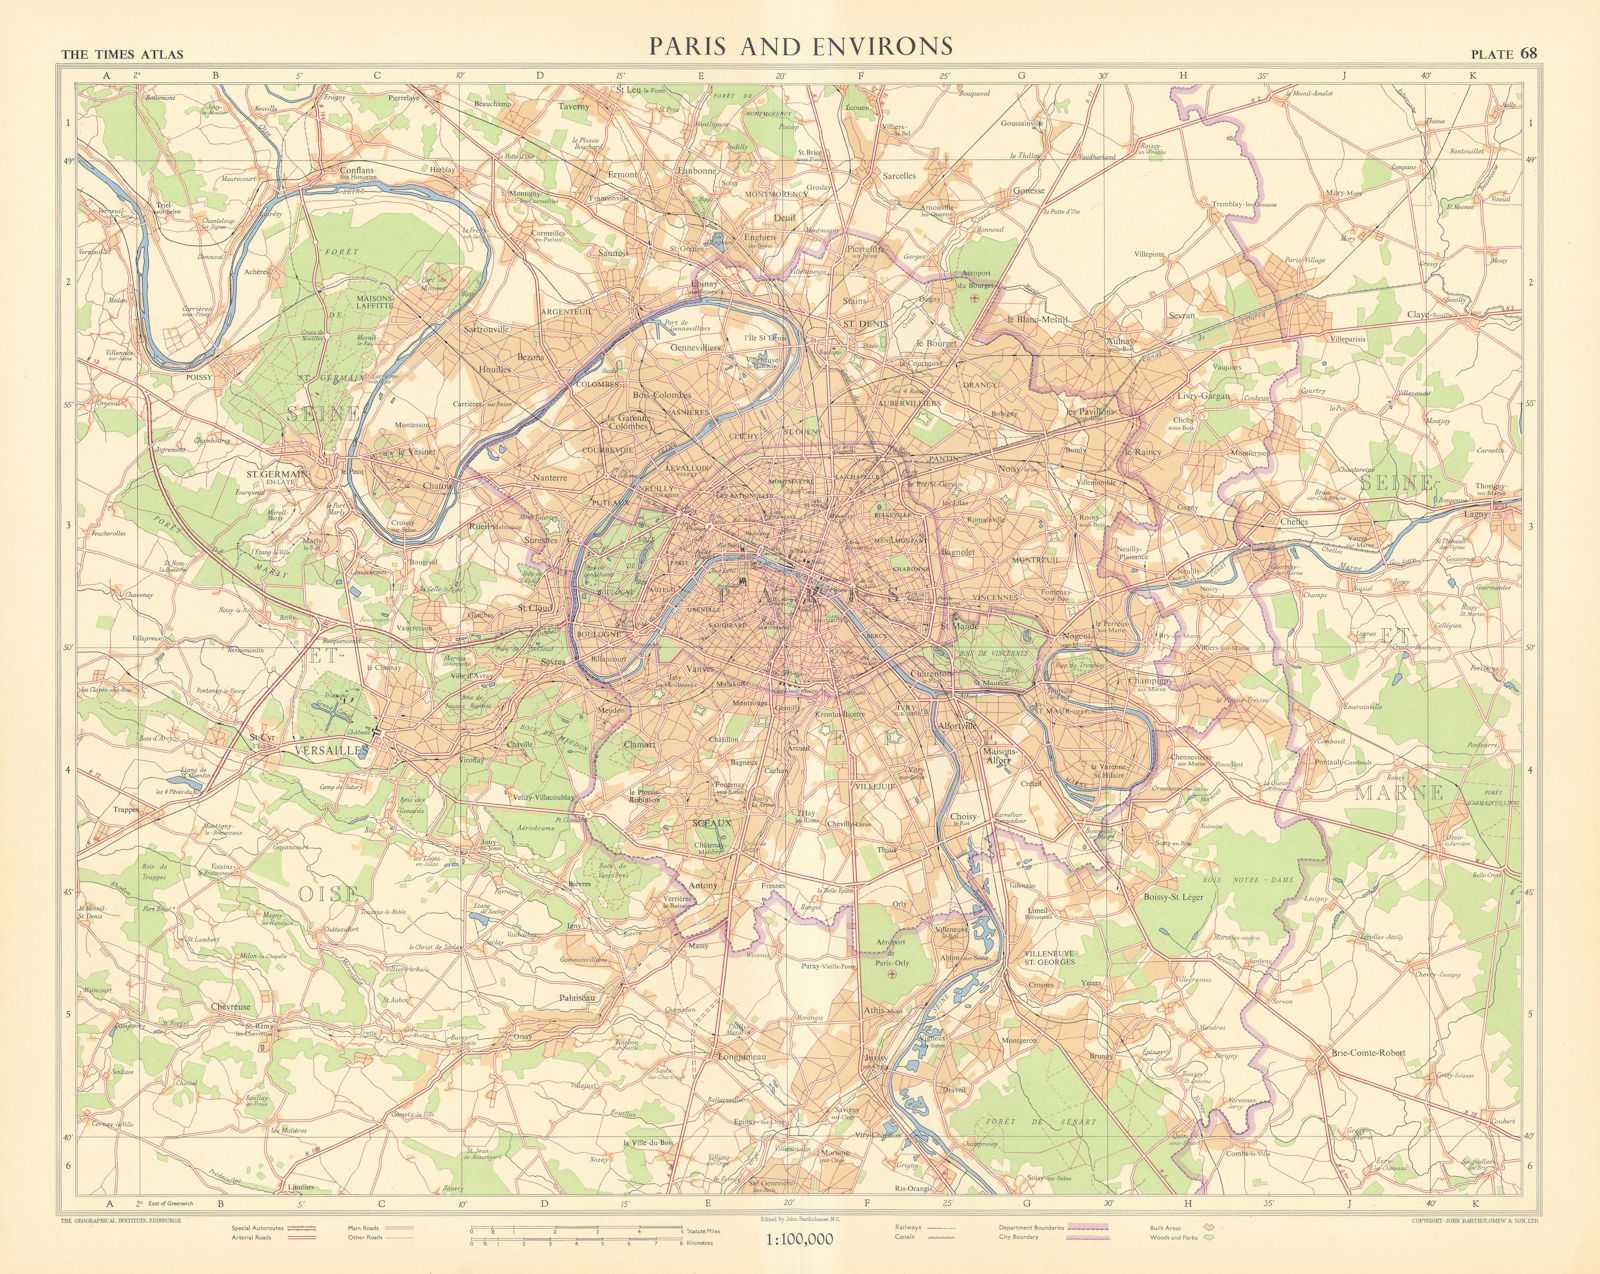 Associate Product Paris and environs. Shows "Special autoroutes". TIMES 1955 old vintage map